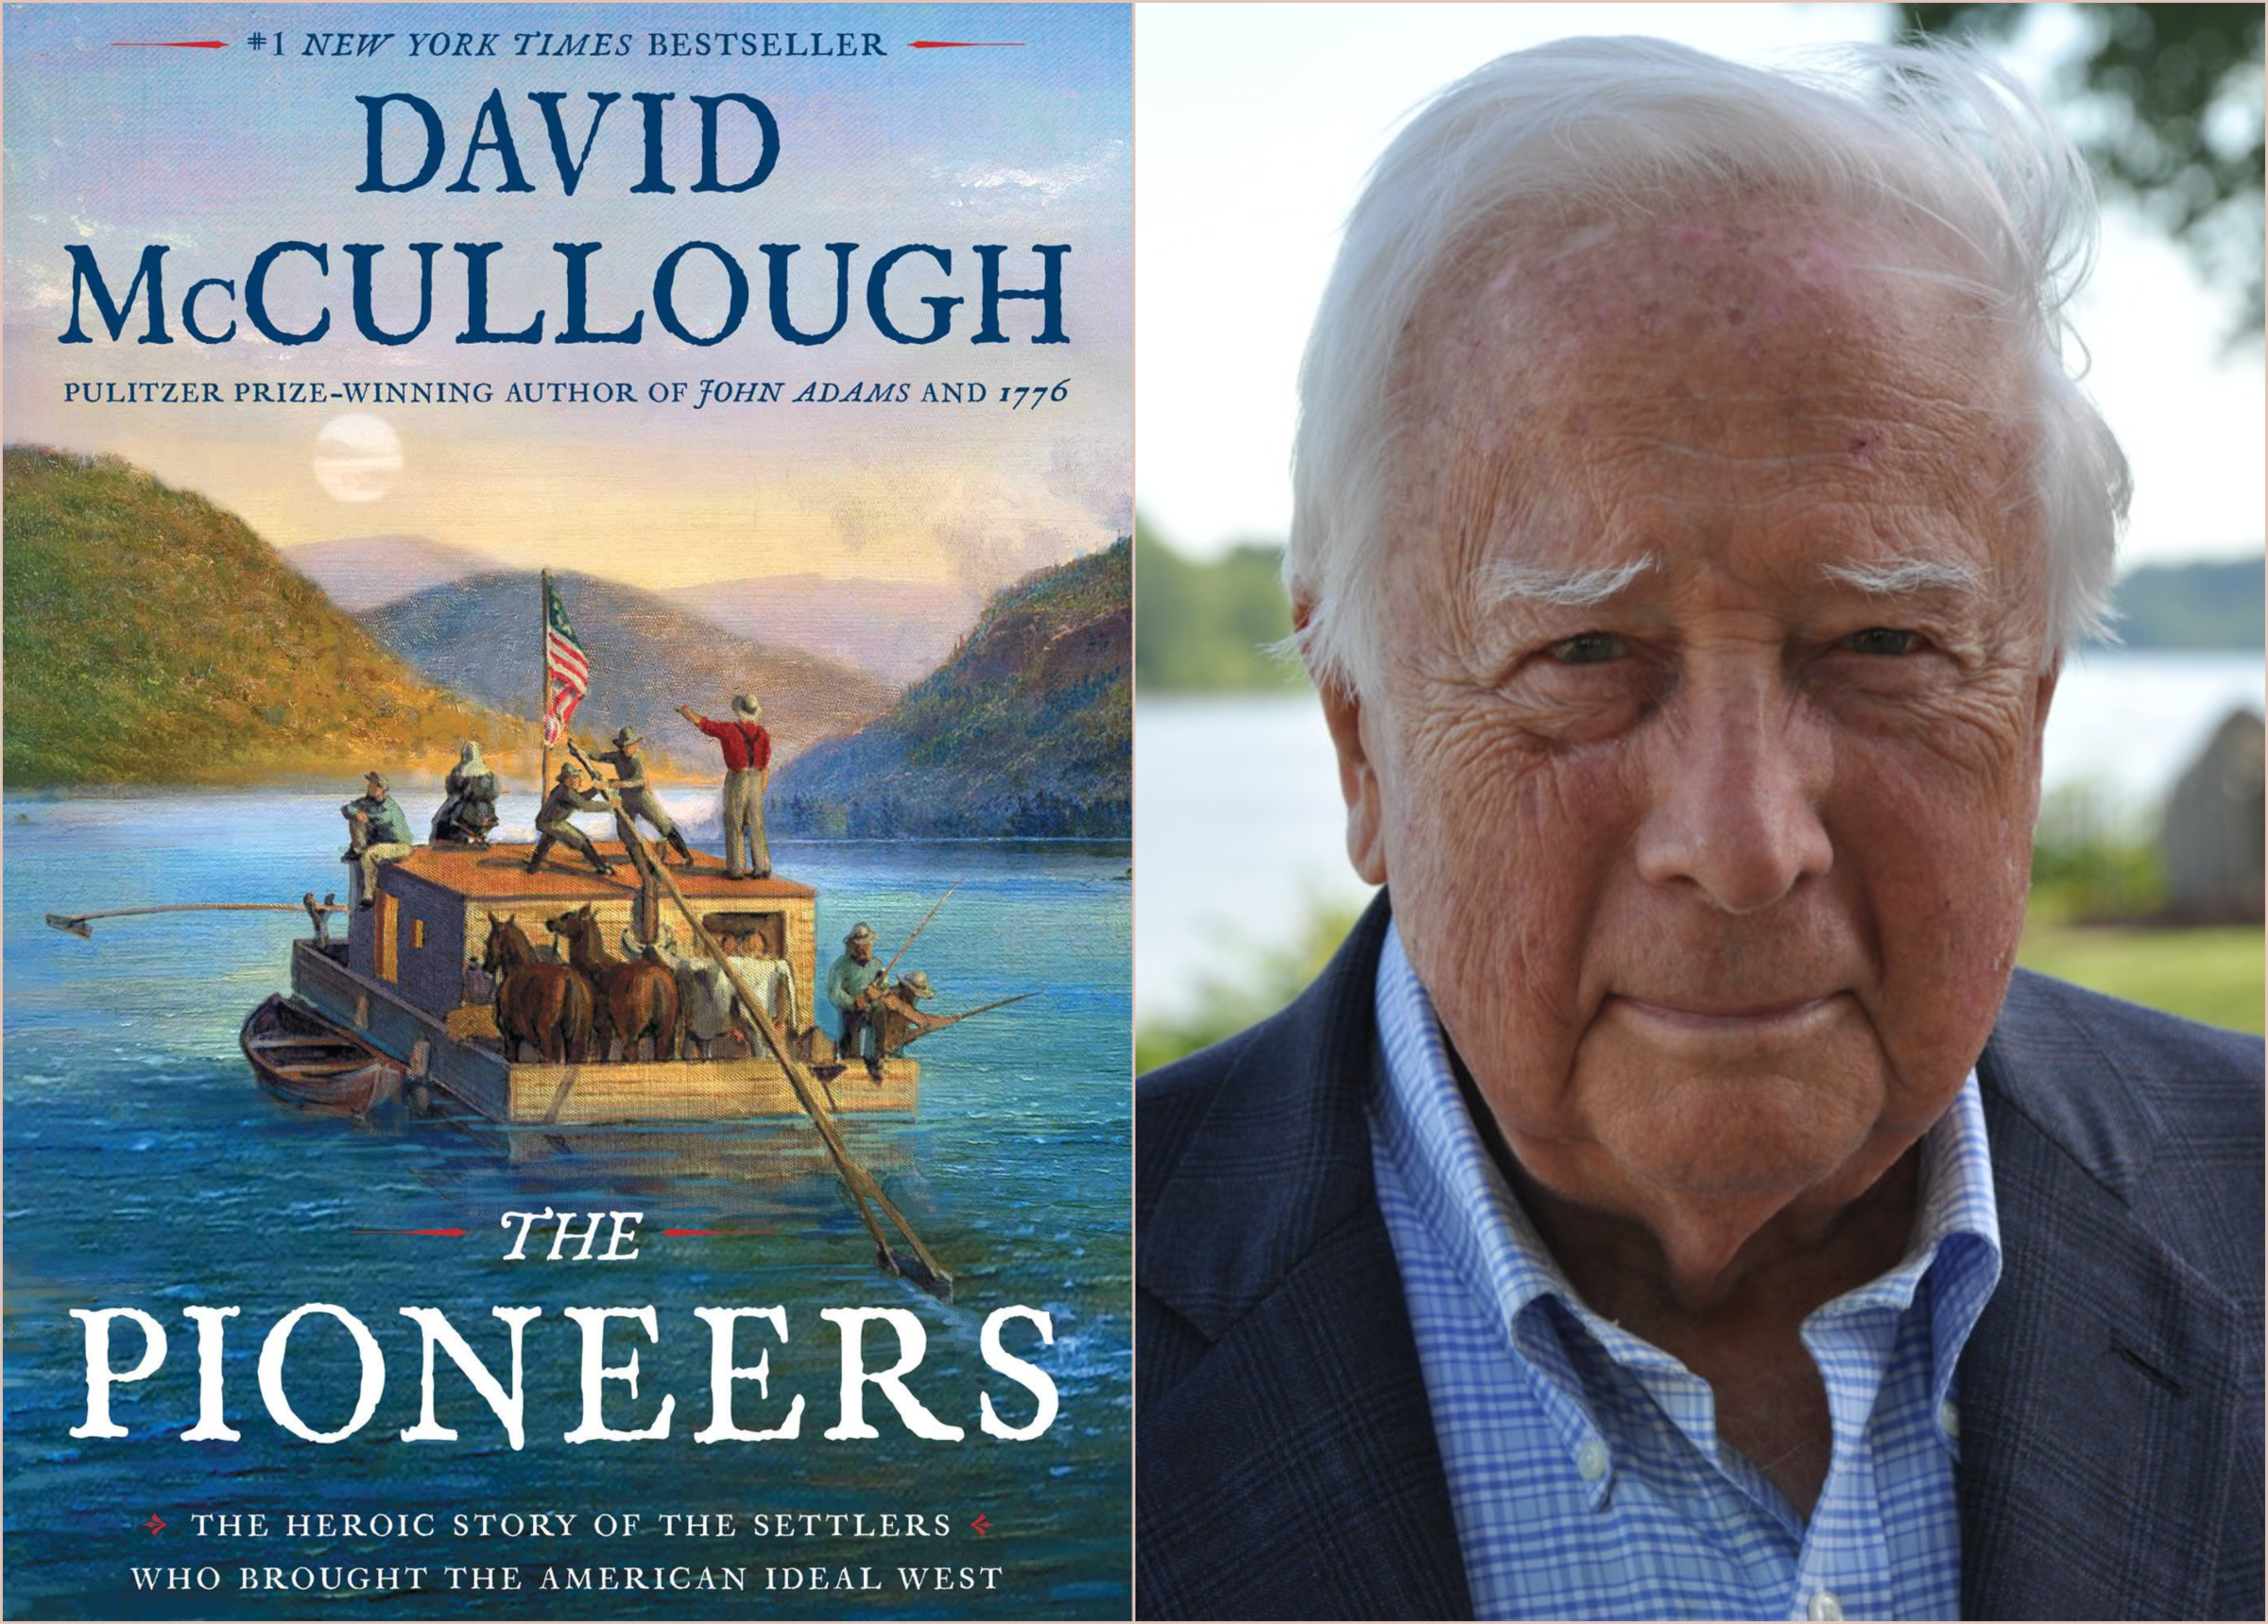 #1610: New York Times Bestselling Author David McCullough’s “The Pioneers”